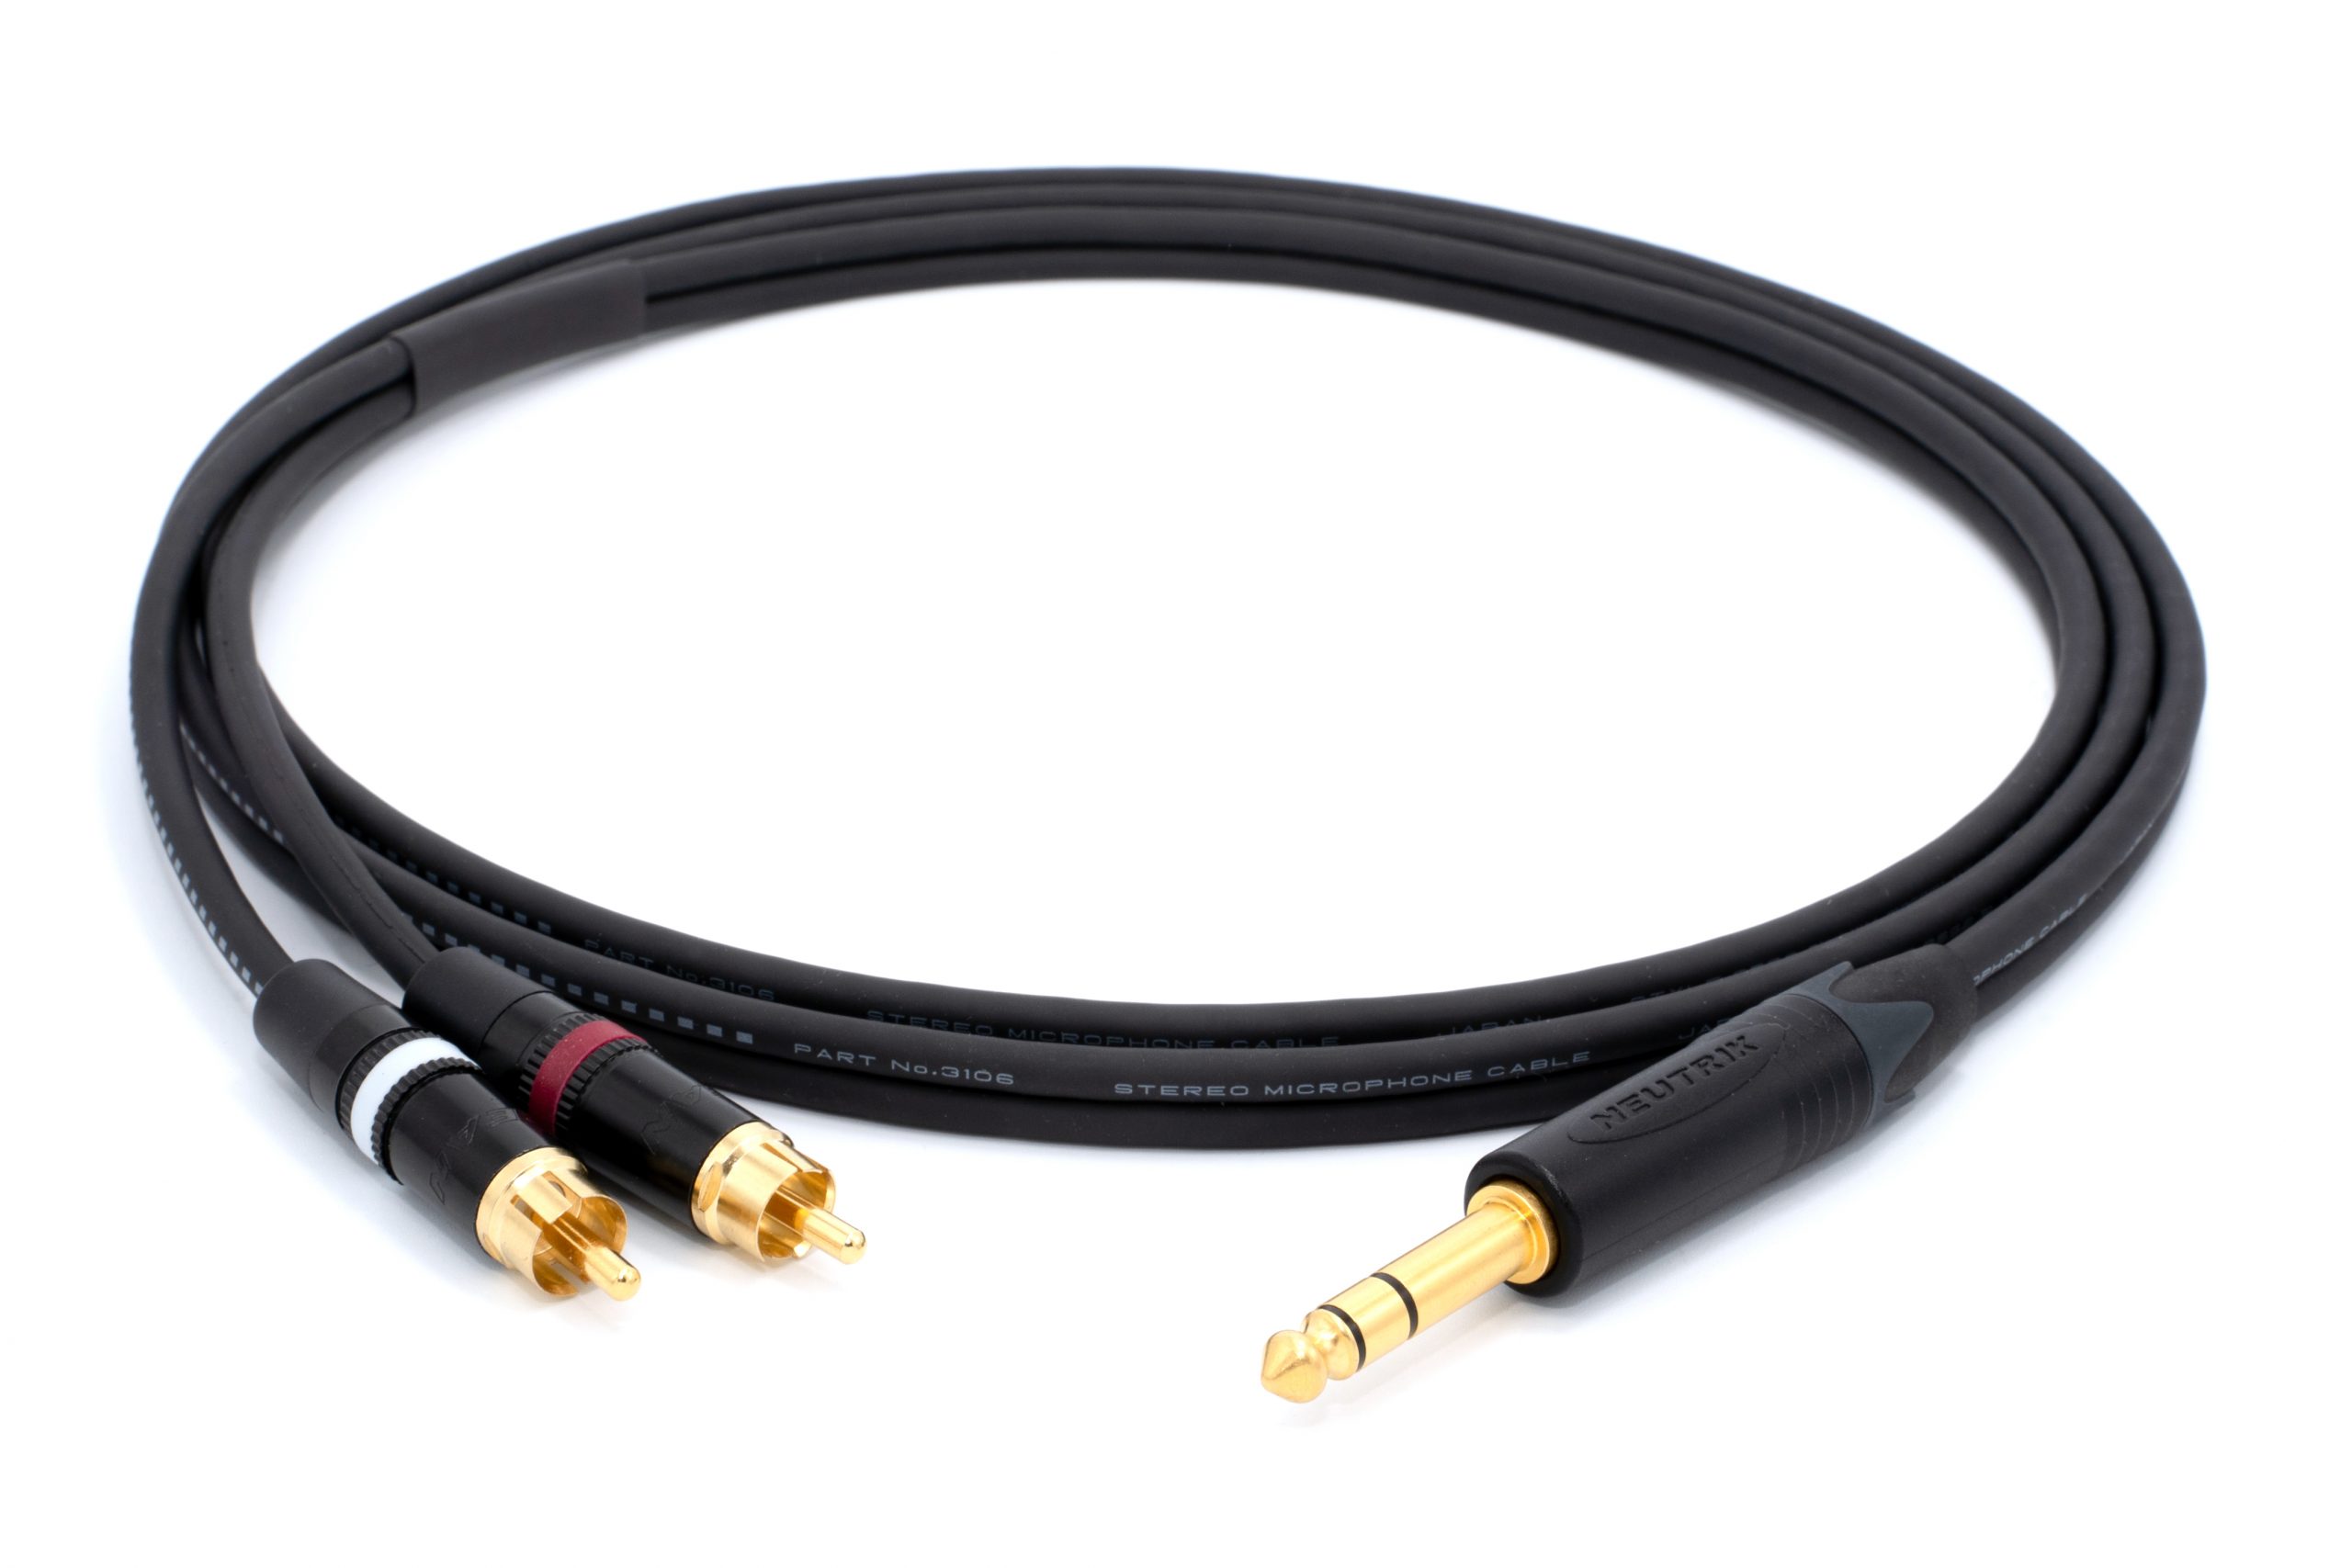 Rca Trs Balanced Cable, Rca Trs Audio Cable, Cable Audio Ts Rca